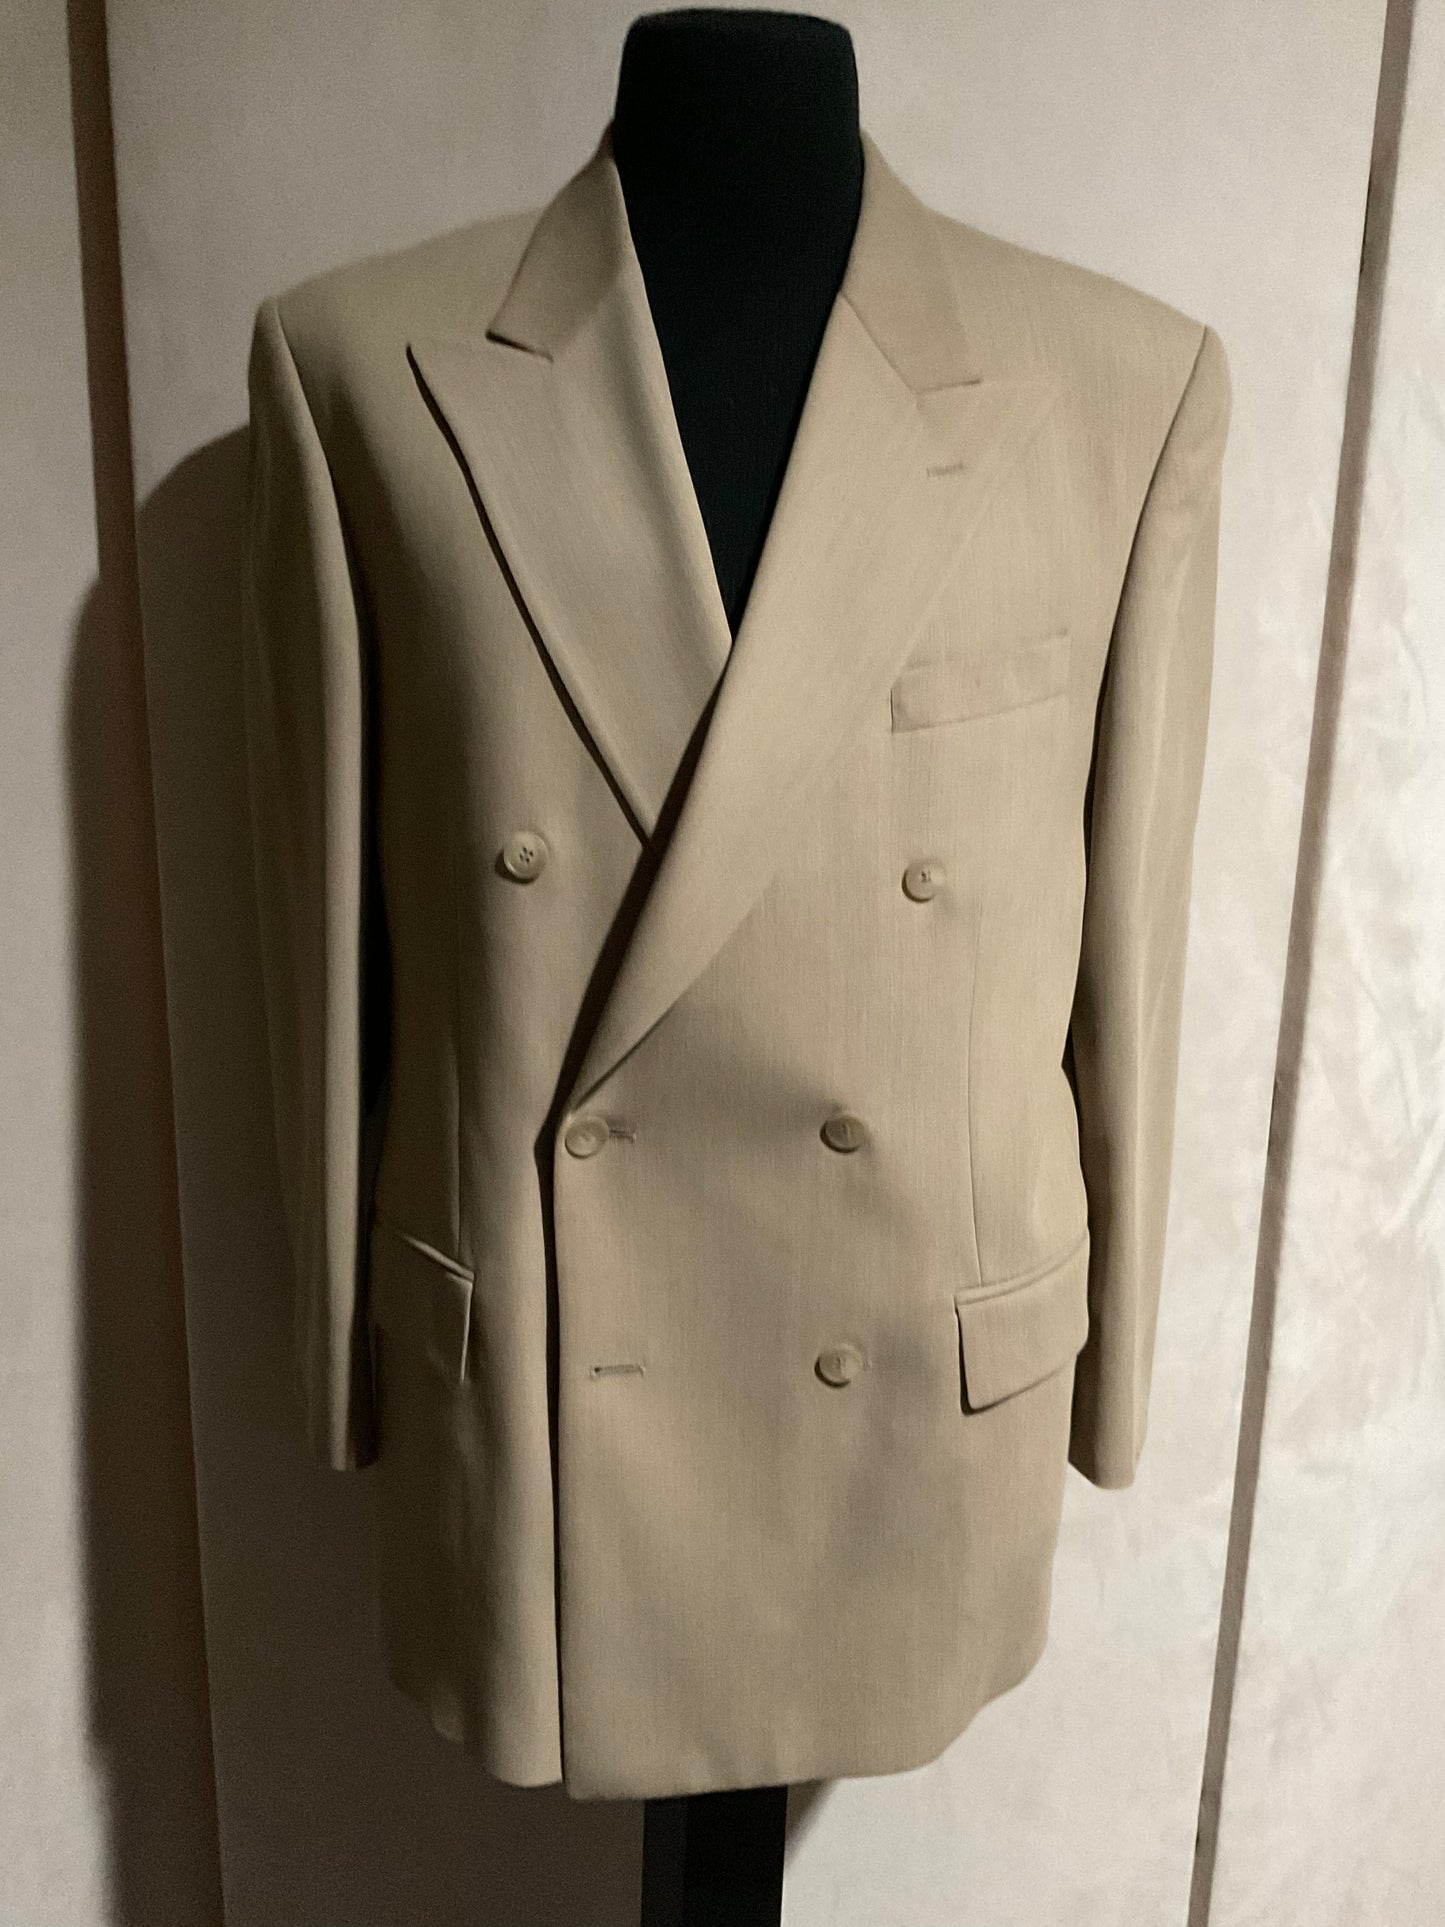 R P SUIT / DOUBLE BREASTED / CAMEL CREPE / 40 REG / MADE IN CANADA